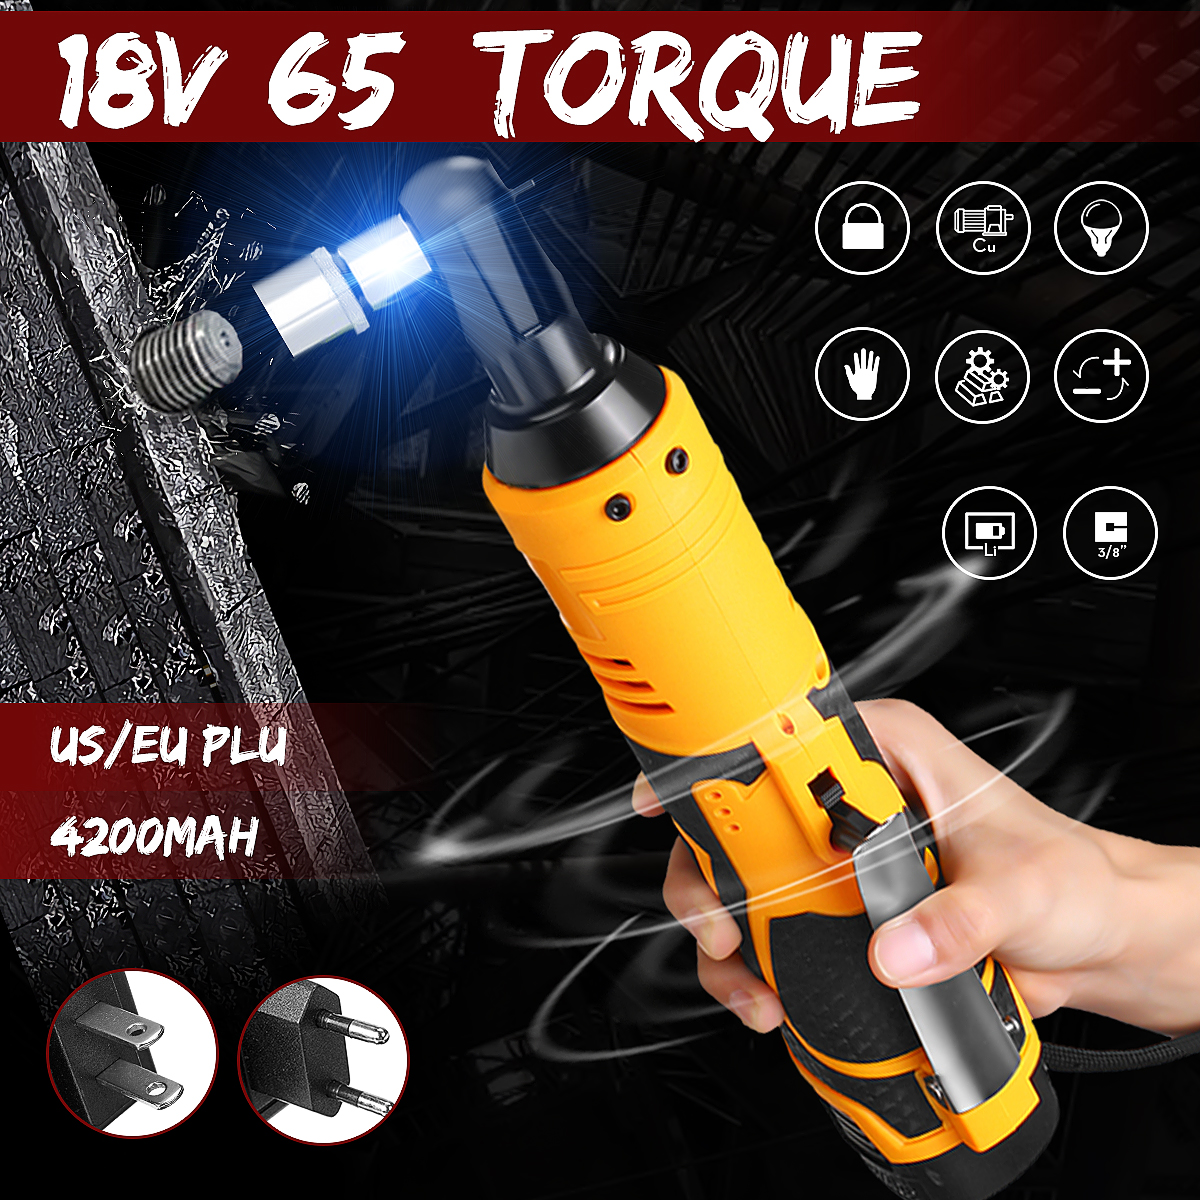 18V-Power-Cordless-Ratchet-Wrench-Li-ion-Electric-Wrench-4200mah-Max-Torque-65-Compact-Size-Battery--1560568-3